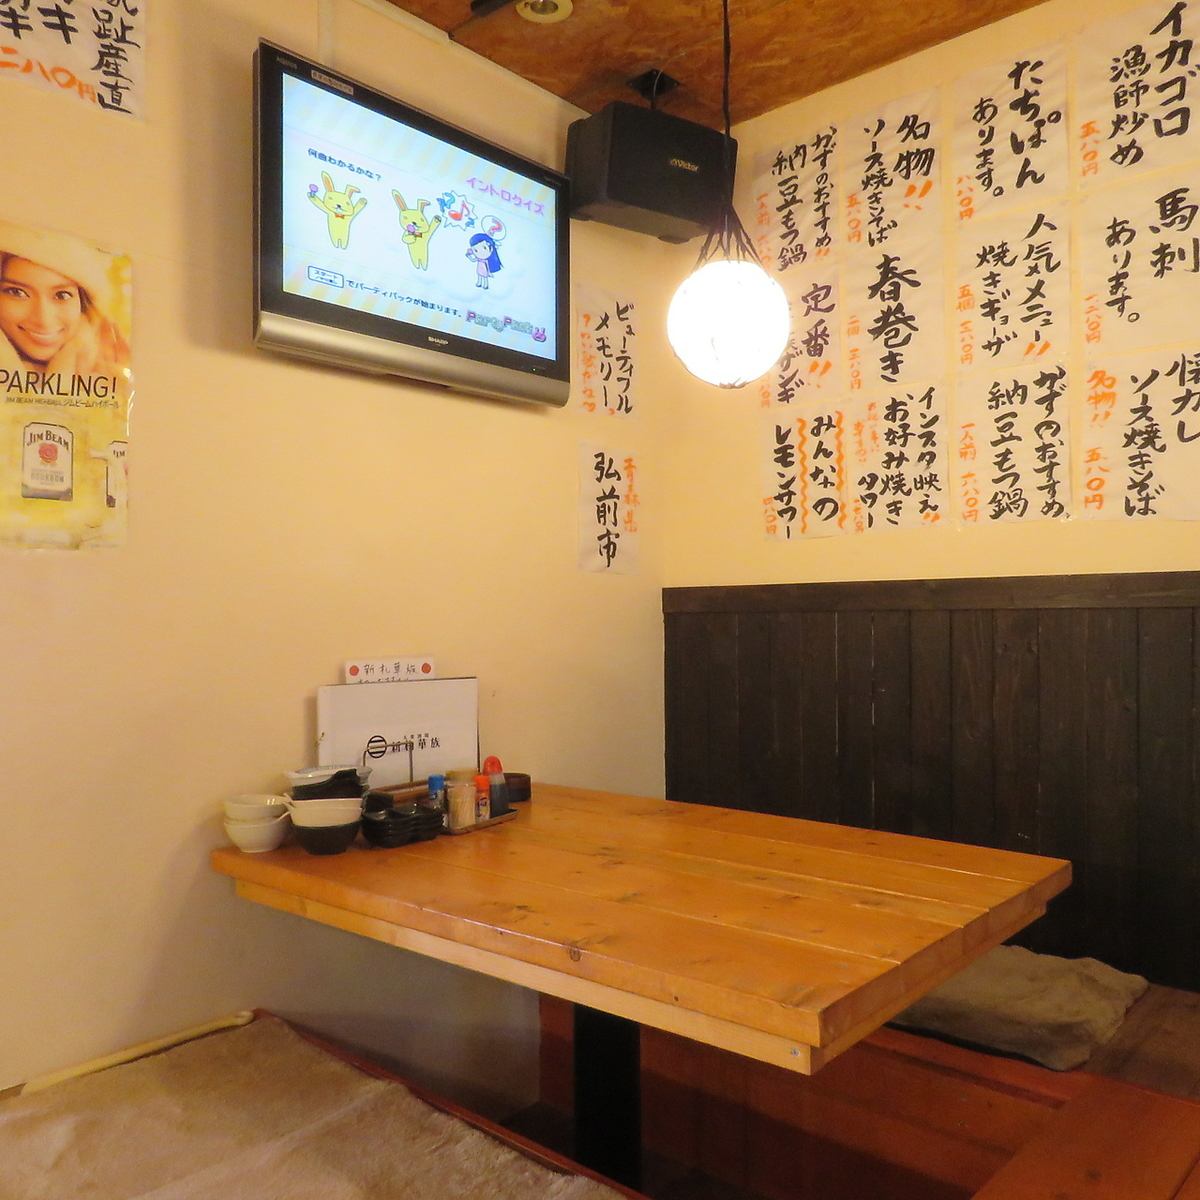 We have 3 private rooms with sunken kotatsu that can be used by 2 to 6 people.